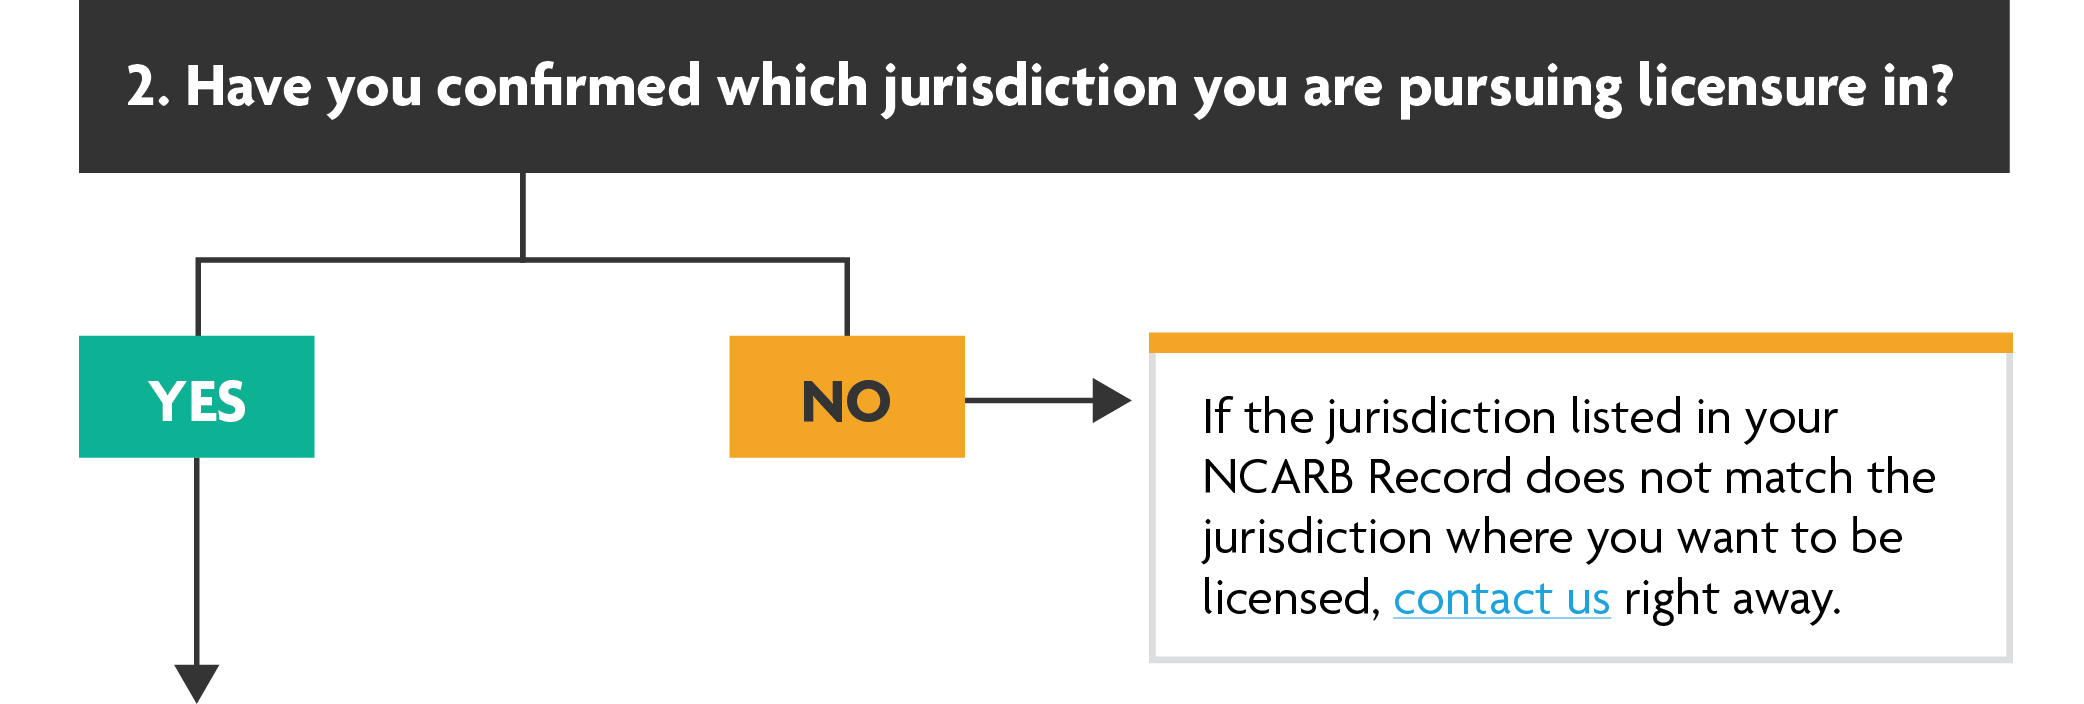 Question 2: Have you confirmed which jurisdiction you are pursuing licensure in? If yes: Move to the next step. If no: If the jurisdiction listed in your NCARB Record does not match the jurisdiction where you want to be licensed, contact us right away.